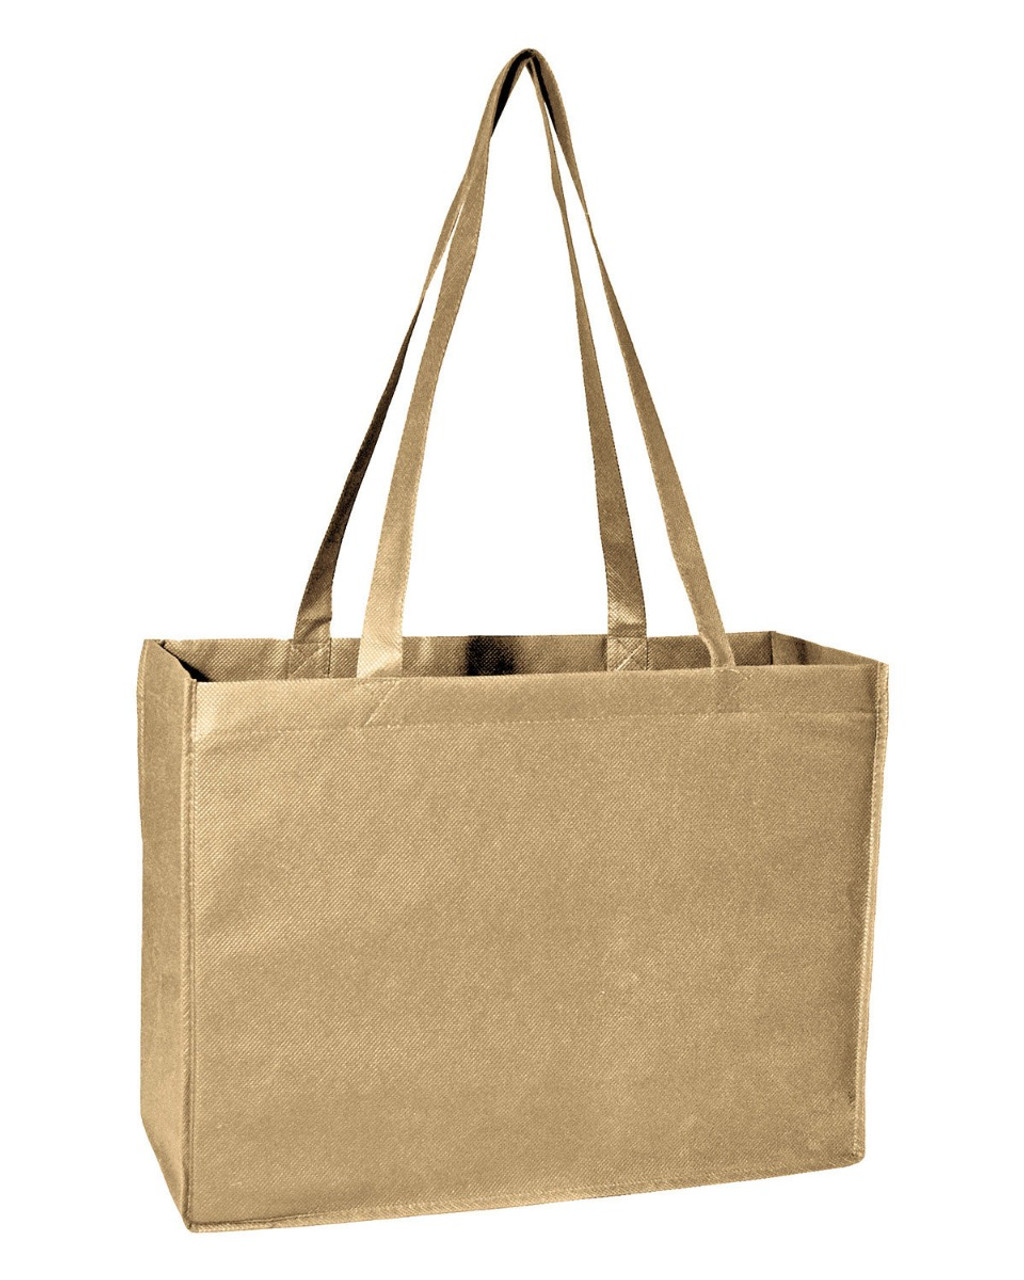 Wholesale Liberty Bags Non-Woven Deluxe Tote Bags in Bulk